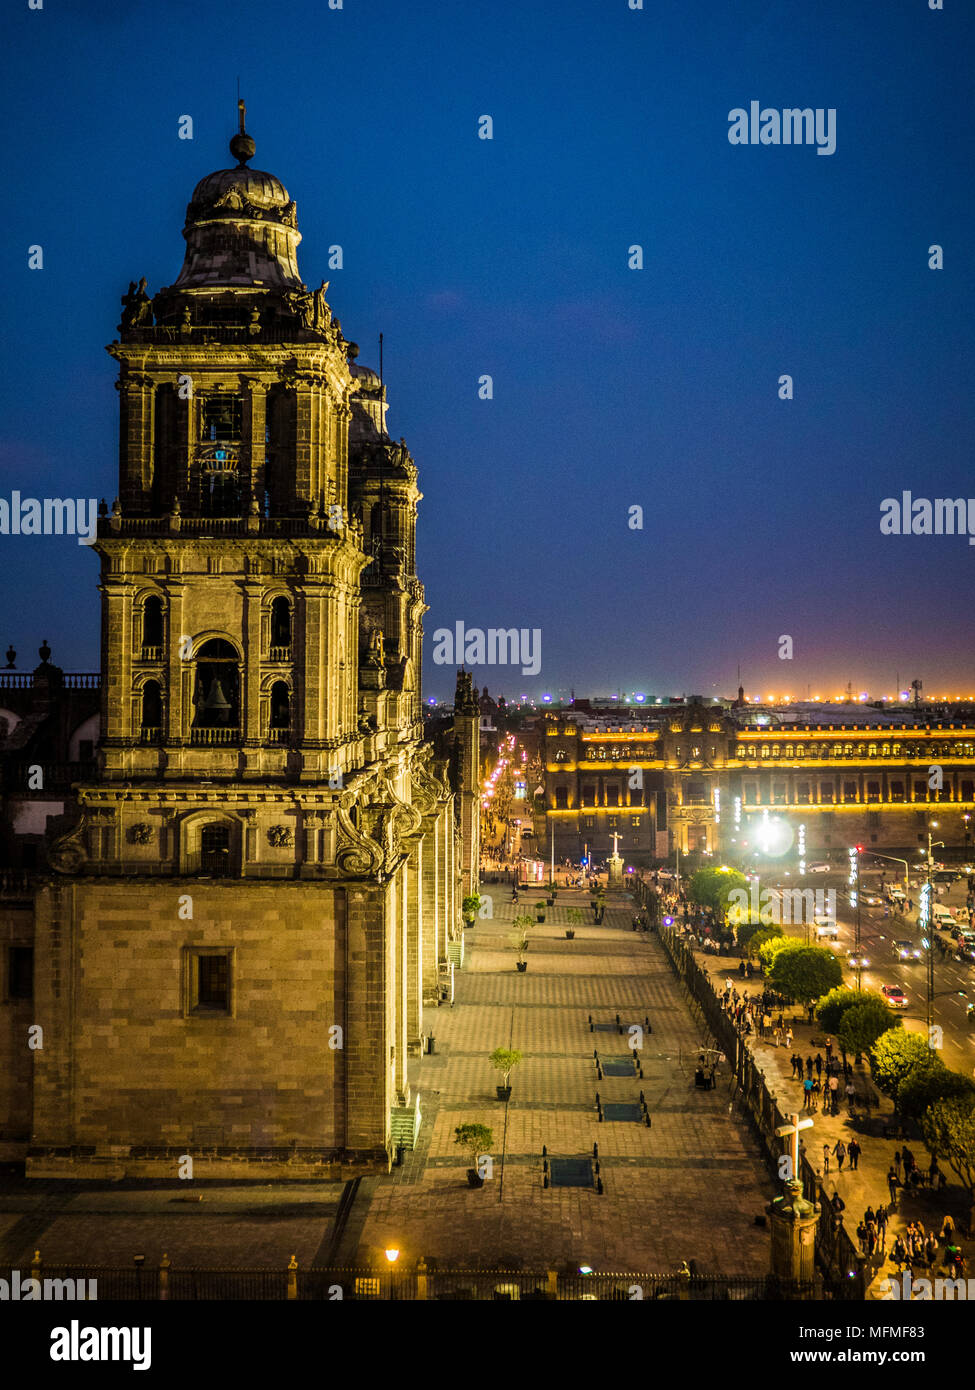 The Metropolitan Cathedral of the Assumption of the Most Blessed Virgin Mary into Heaven in Mexico City.  The Roman Catholic Archdiocese of Mexico. Stock Photo